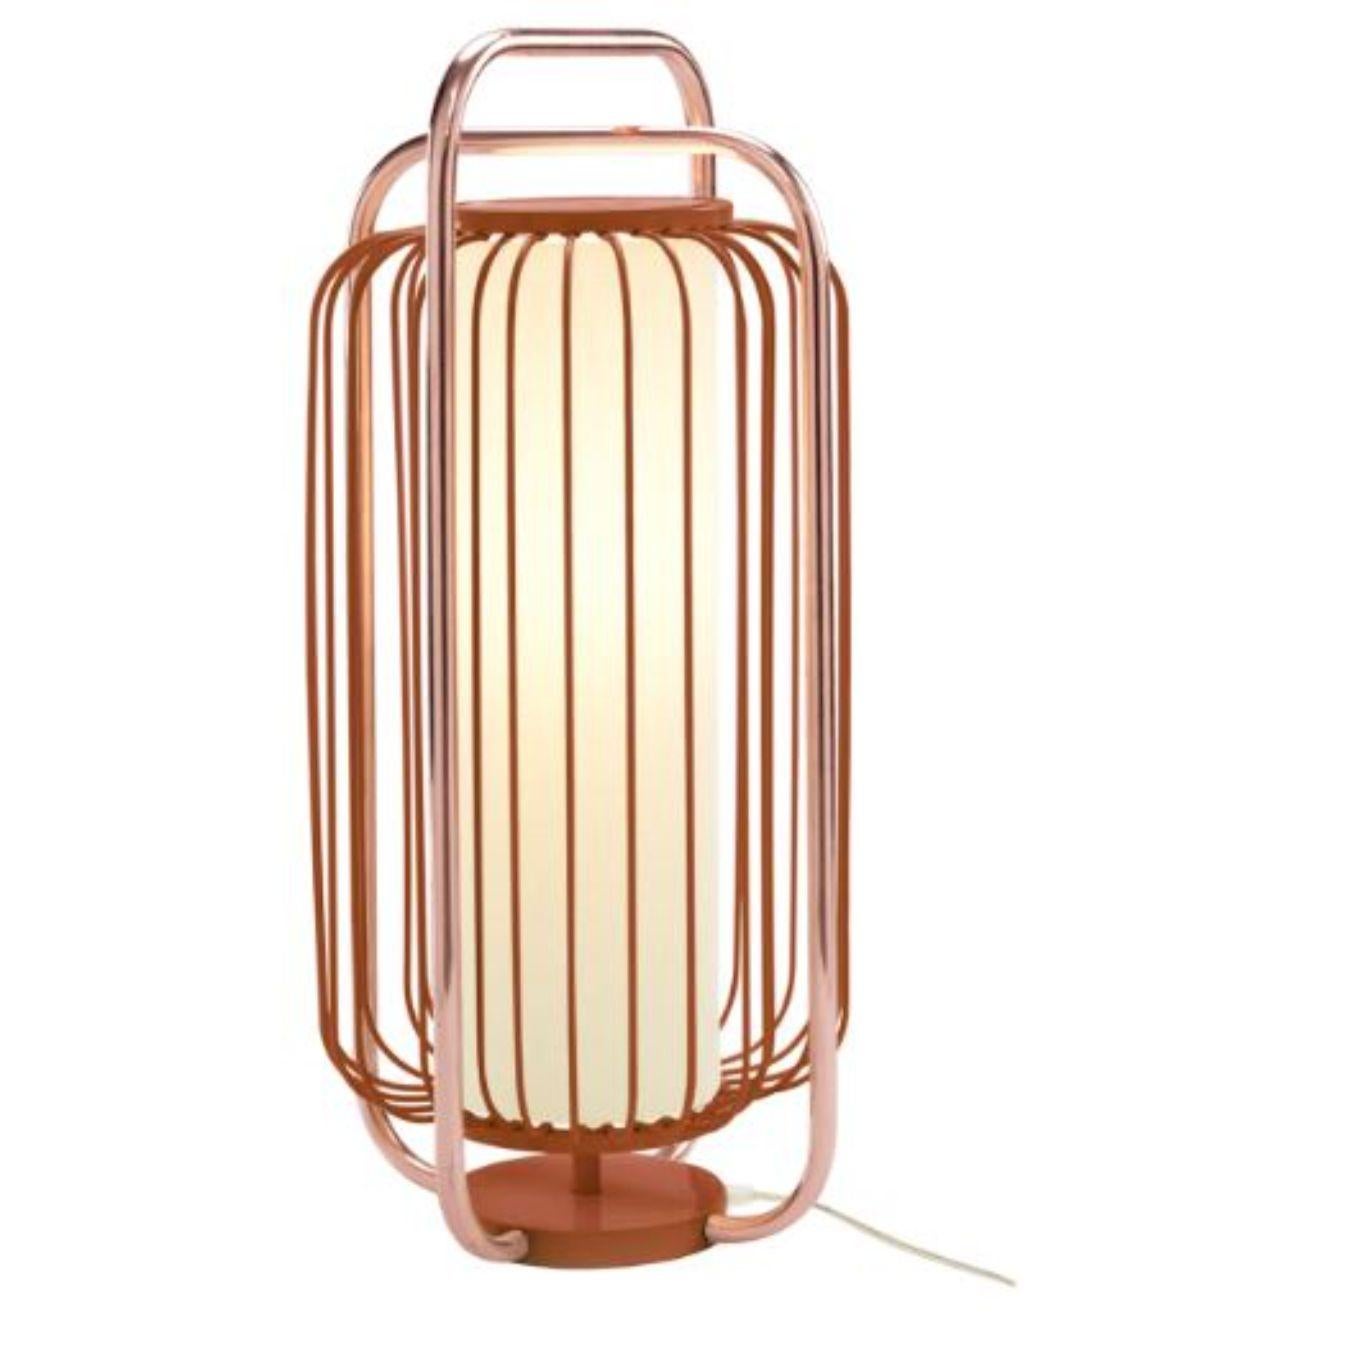 Copper Jules table lamp by Dooq.
Dimensions: W 30 x D 30 x H 63 cm.
Materials: lacquered metal, polished or brushed metal, copper.
abat-jour: cotton
Also available in different colours and materials.

Information:
230V/50Hz
E27/1x10W